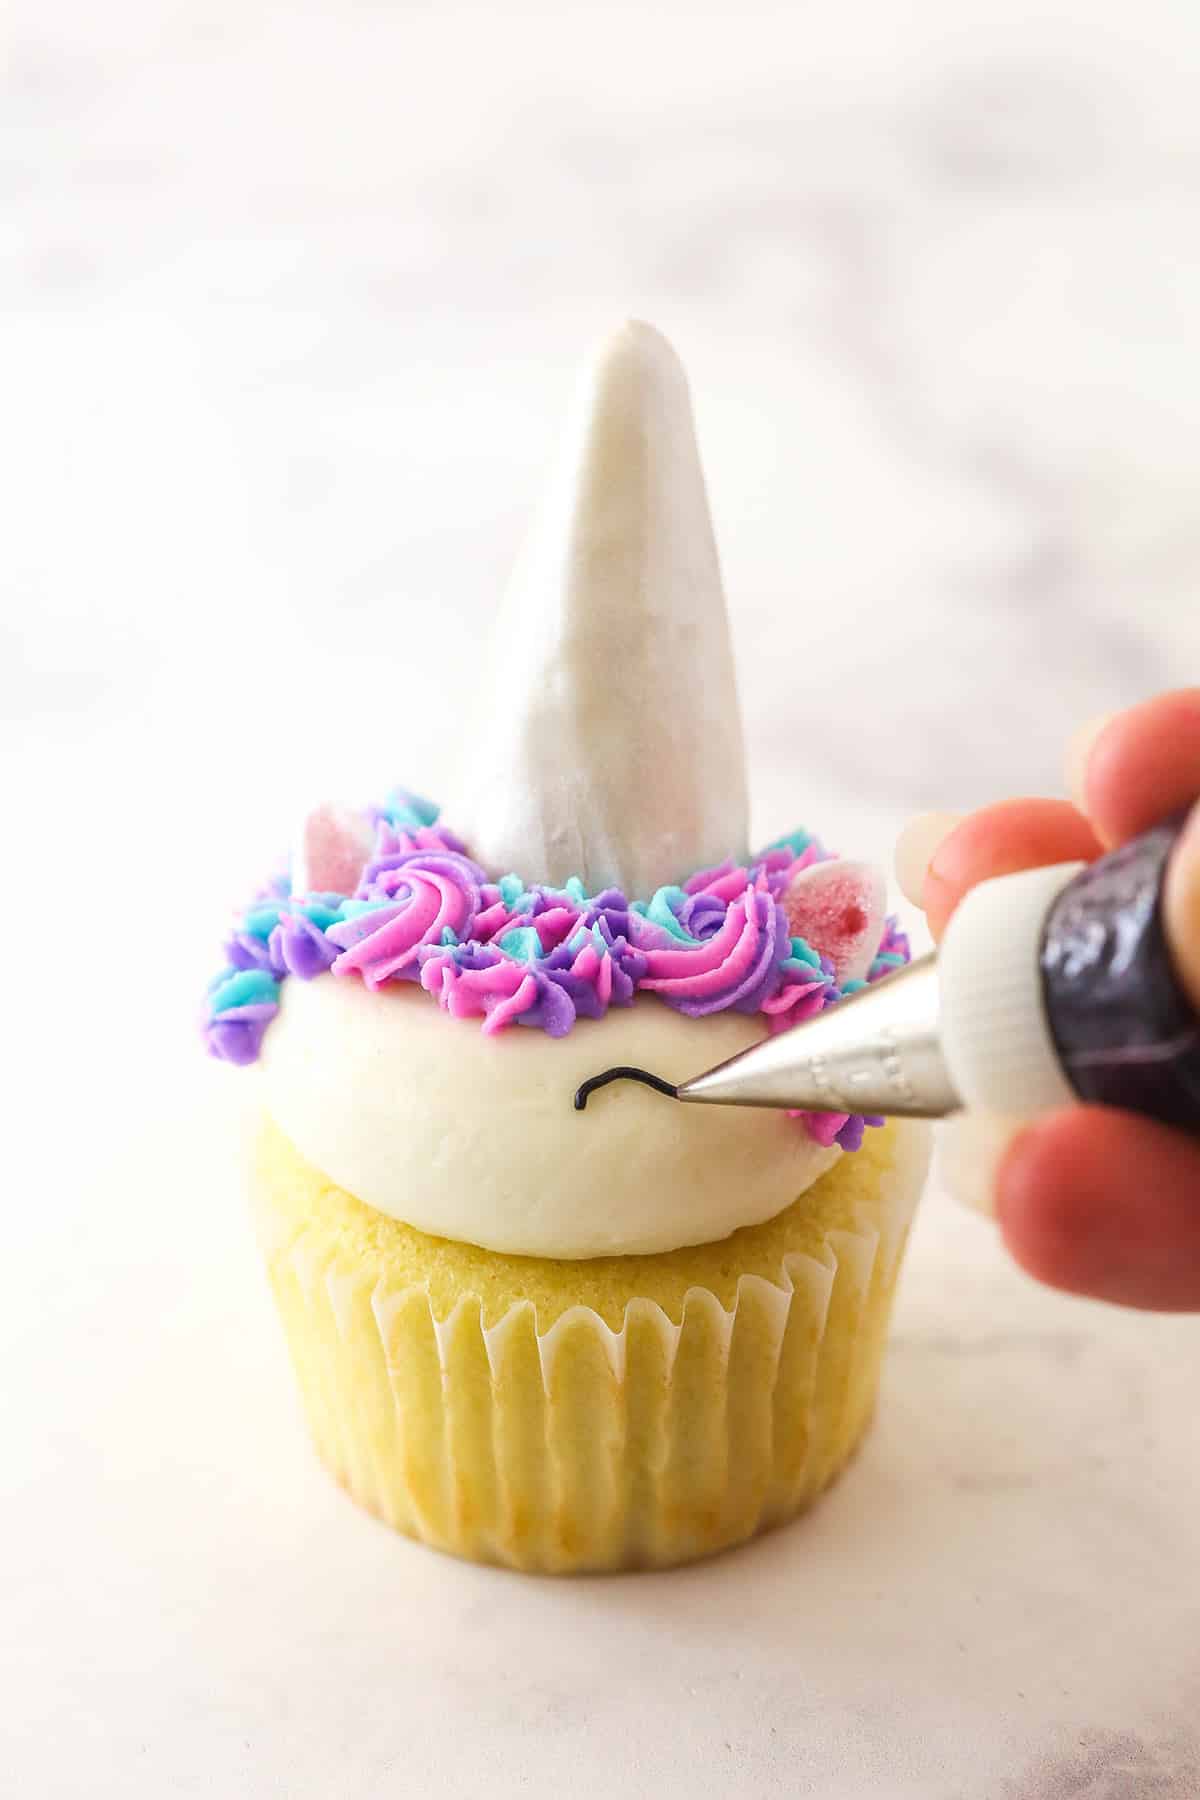 Piping the eyes onto the easy unicorn cupcakes.